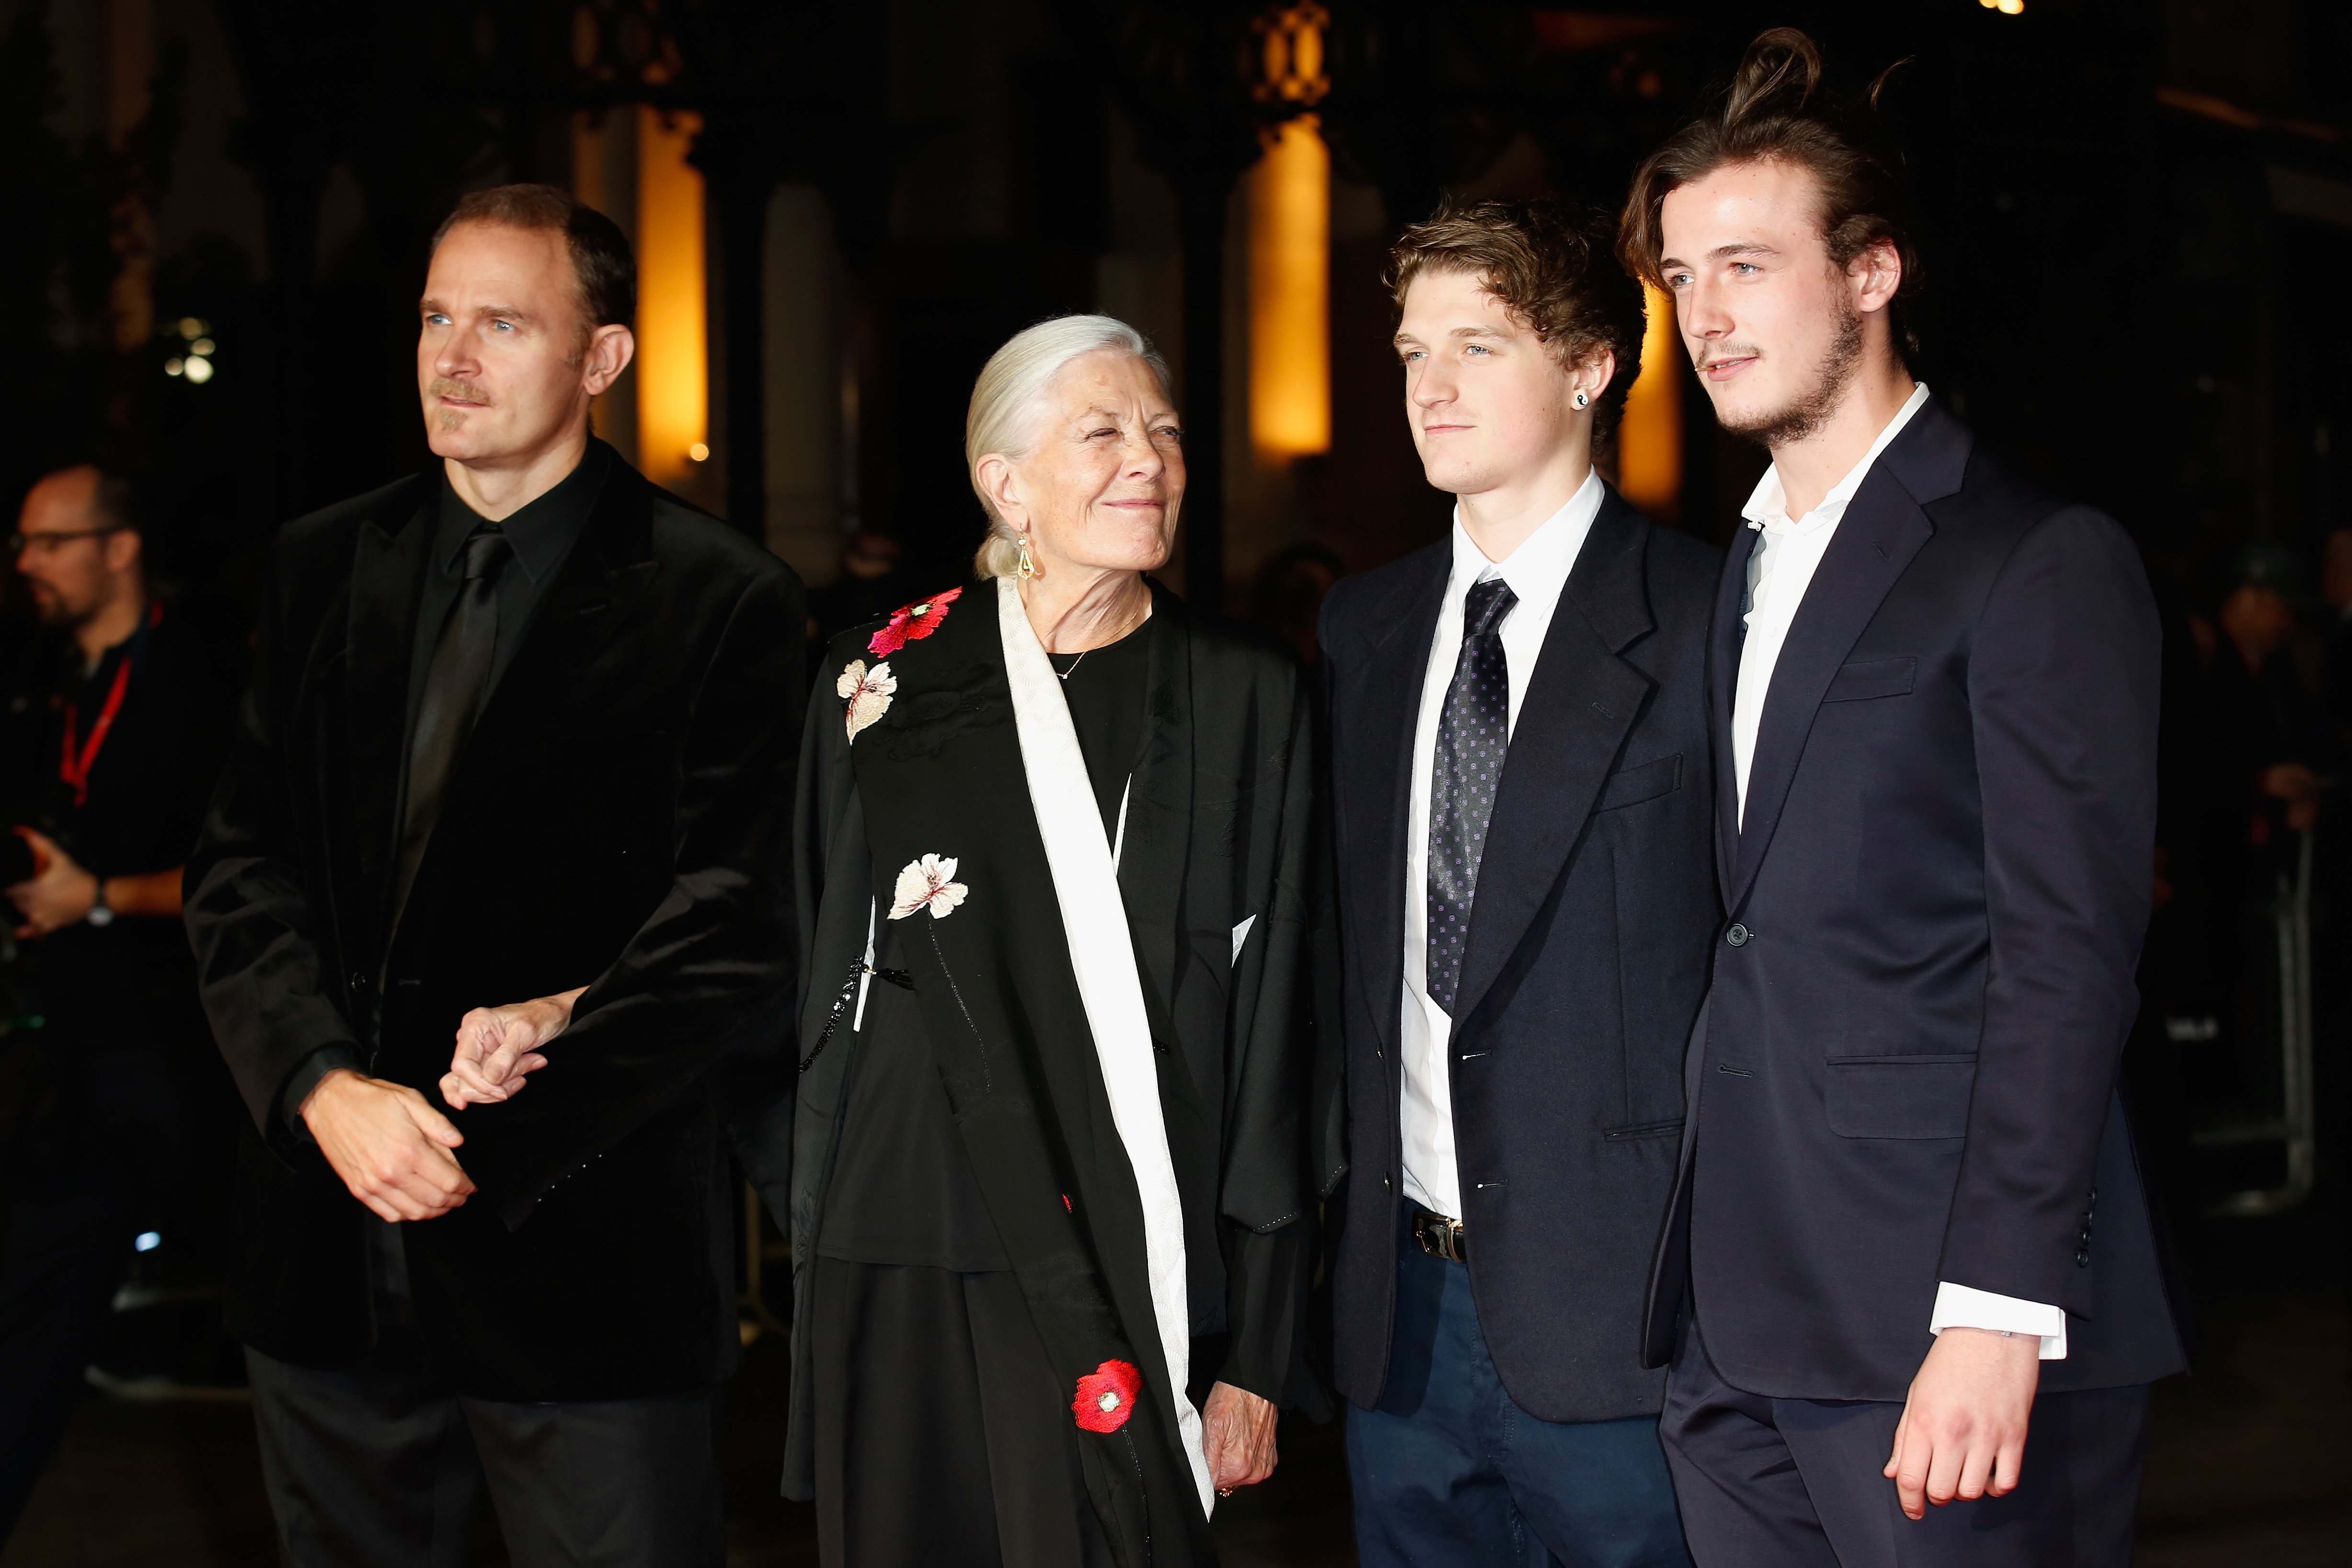 Vanessa Redgrave with her son and grandsons Raphael Nero, Carlo Nero, and Michael Neeson during the VIP arrivals of the Amex Gala premiere for "Foxcatcher" during the 58th BFI London Film Festival at Odeon Leicester Square on October 16, 2014 in London, England. / Source: Getty Images